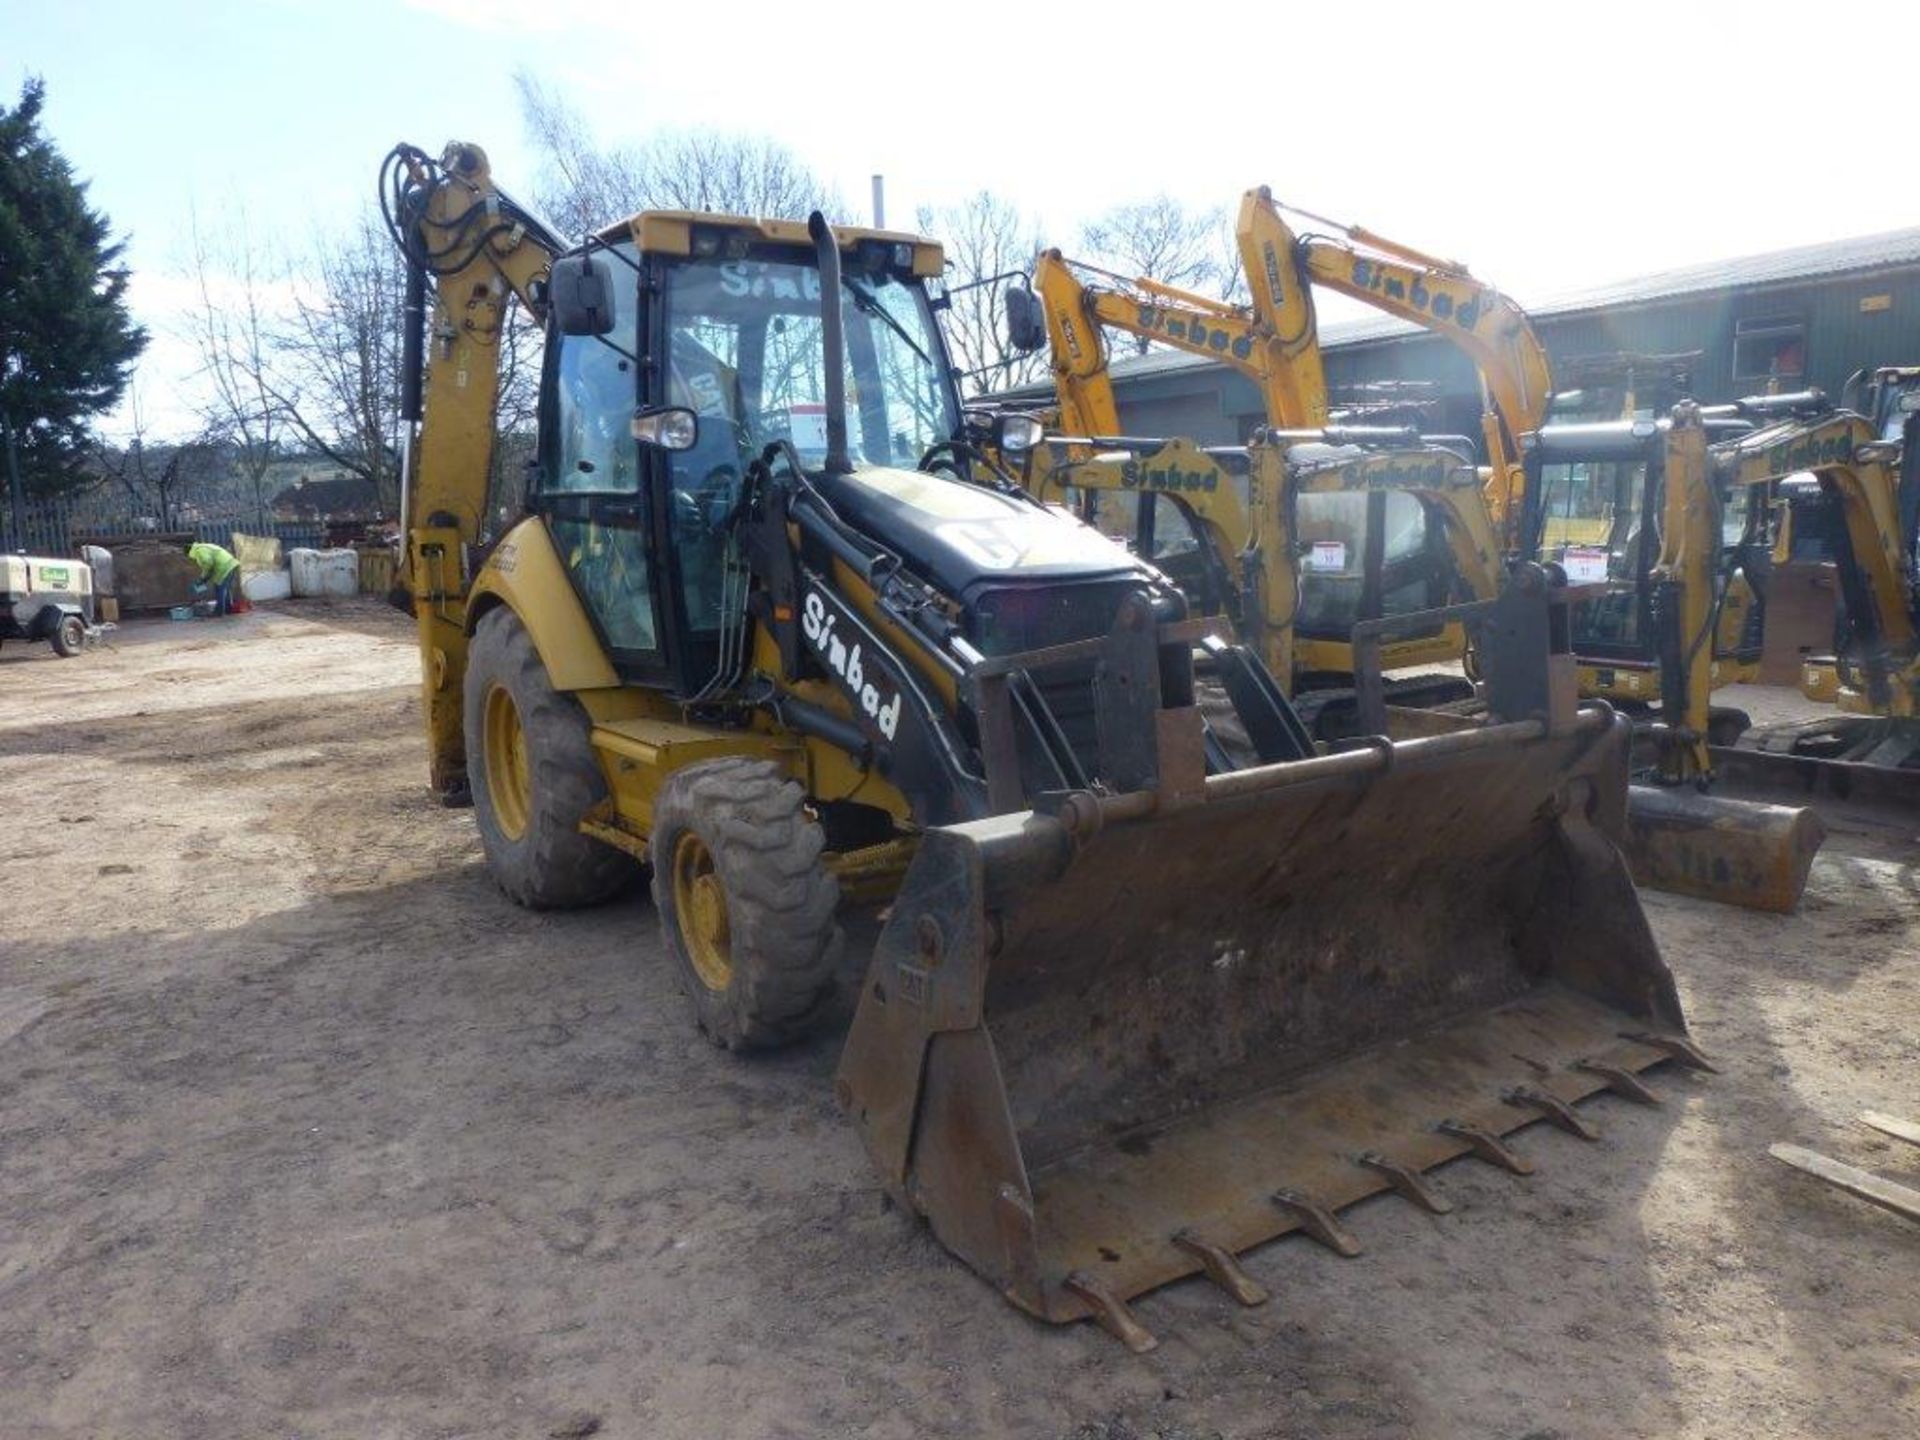 Caterpillar 428E 4x4 backhoe loader (2007), indicated hours 4478.5, PIN no. CAT0428ECSNL01070, - Image 2 of 7